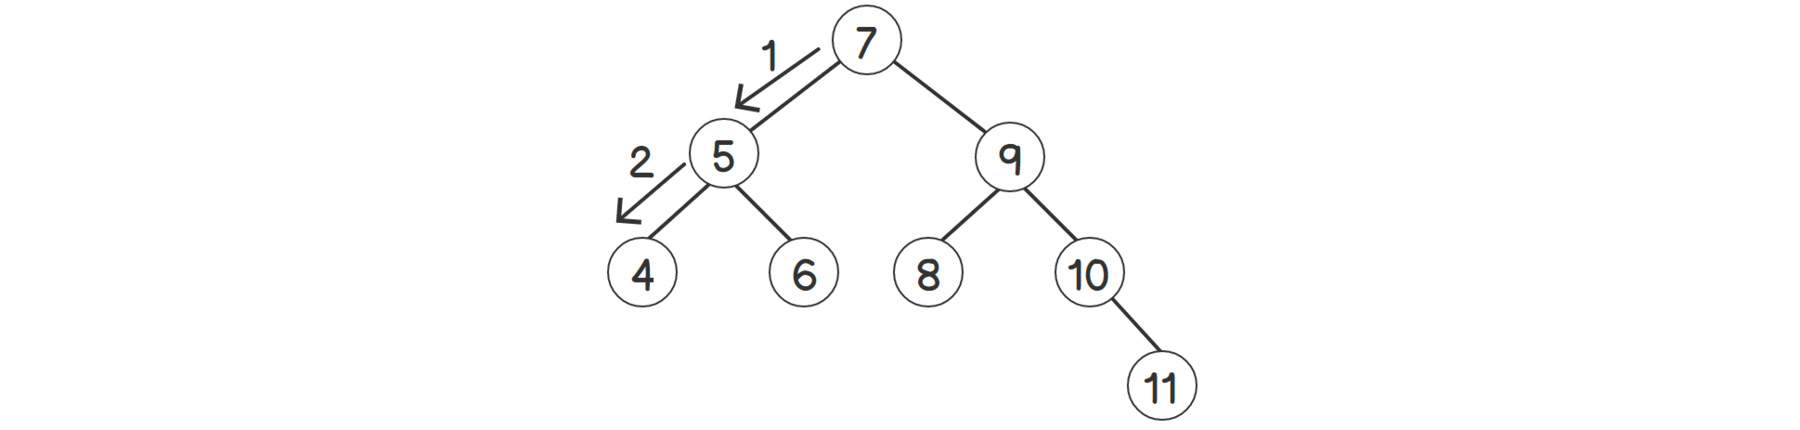 Figure 2.12: Finding an element in a balanced tree